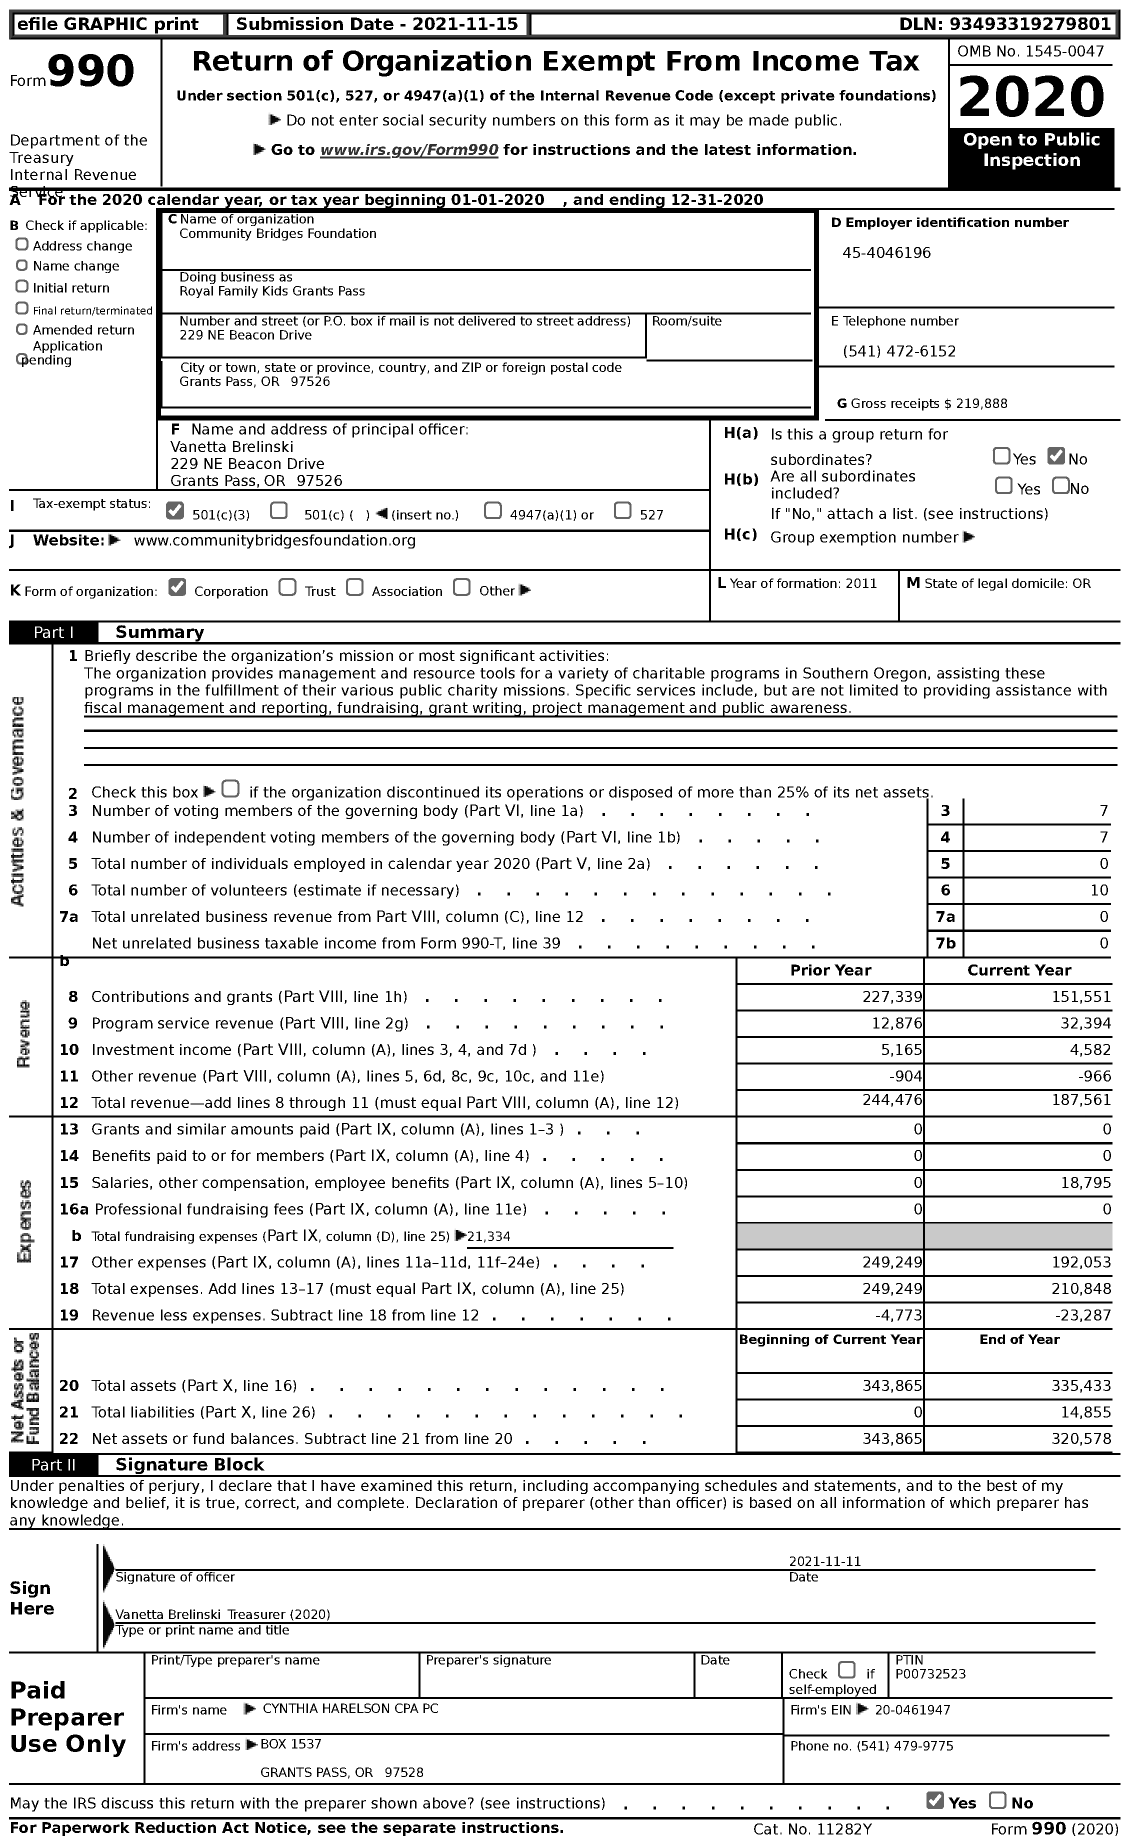 Image of first page of 2020 Form 990 for Royal Family Kids Grants Pass